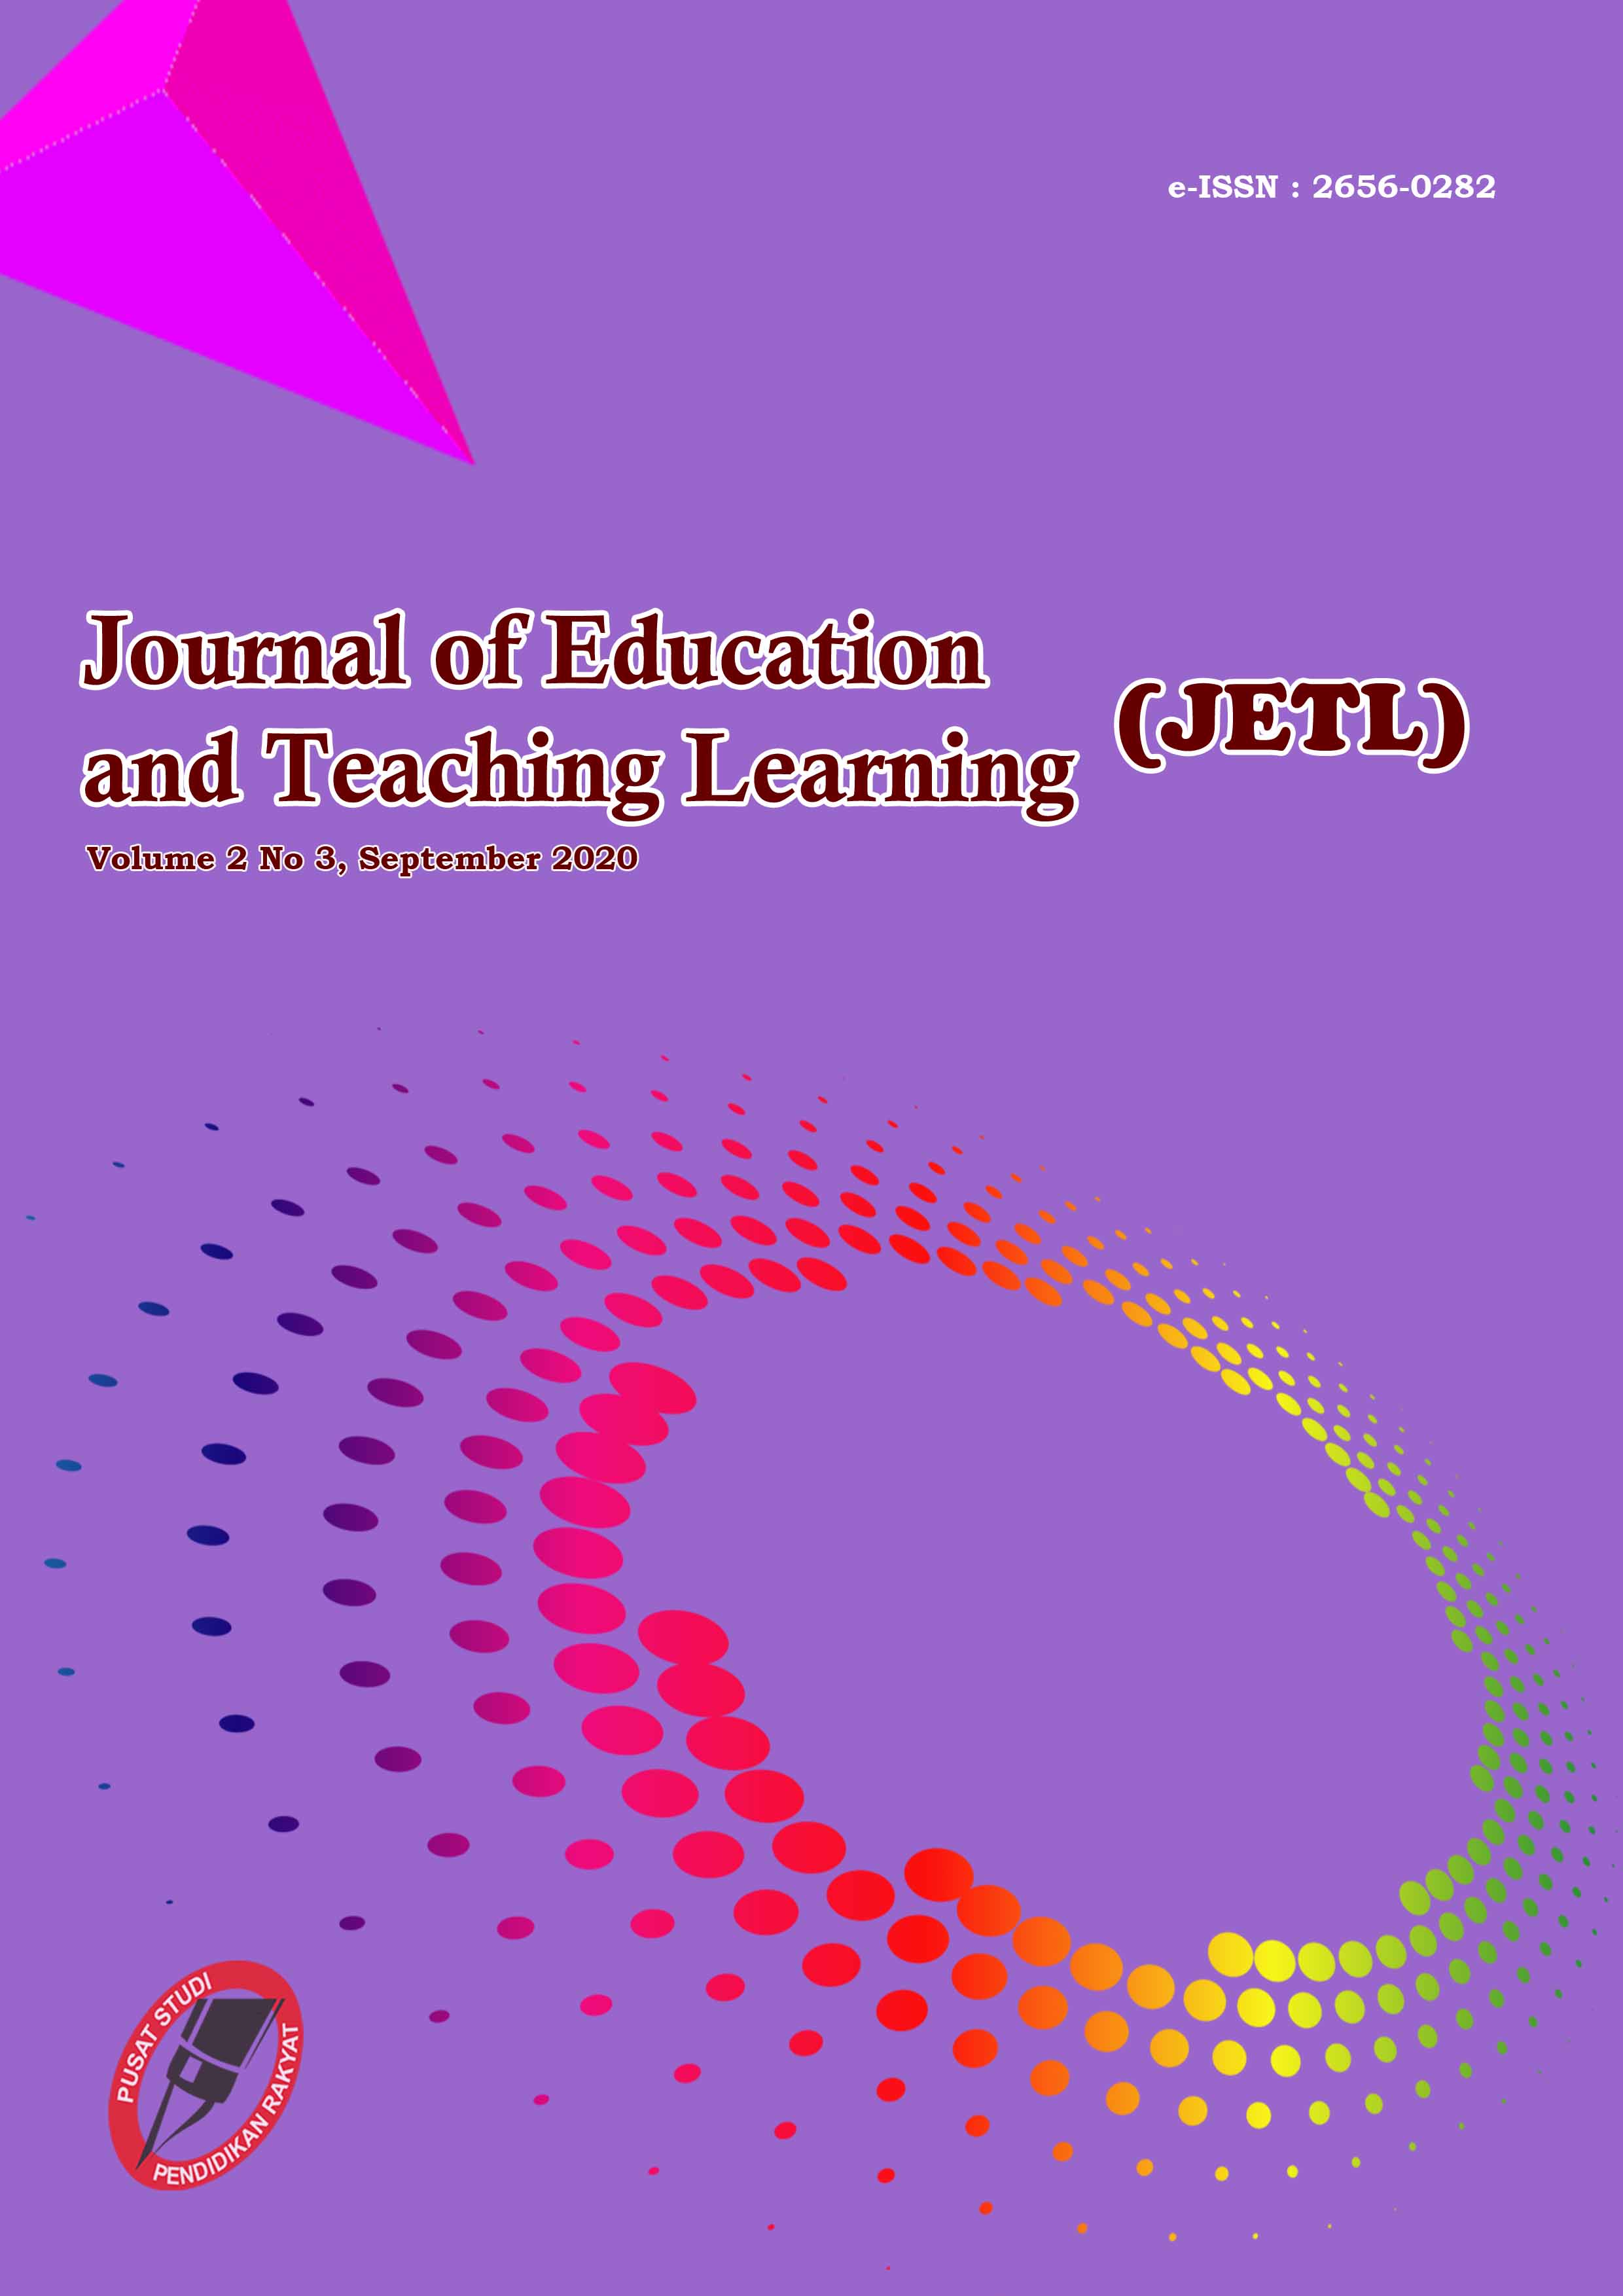 					View Vol. 2 No. 3 (2020): Journal of Education and Teaching Learning (JETL)
				